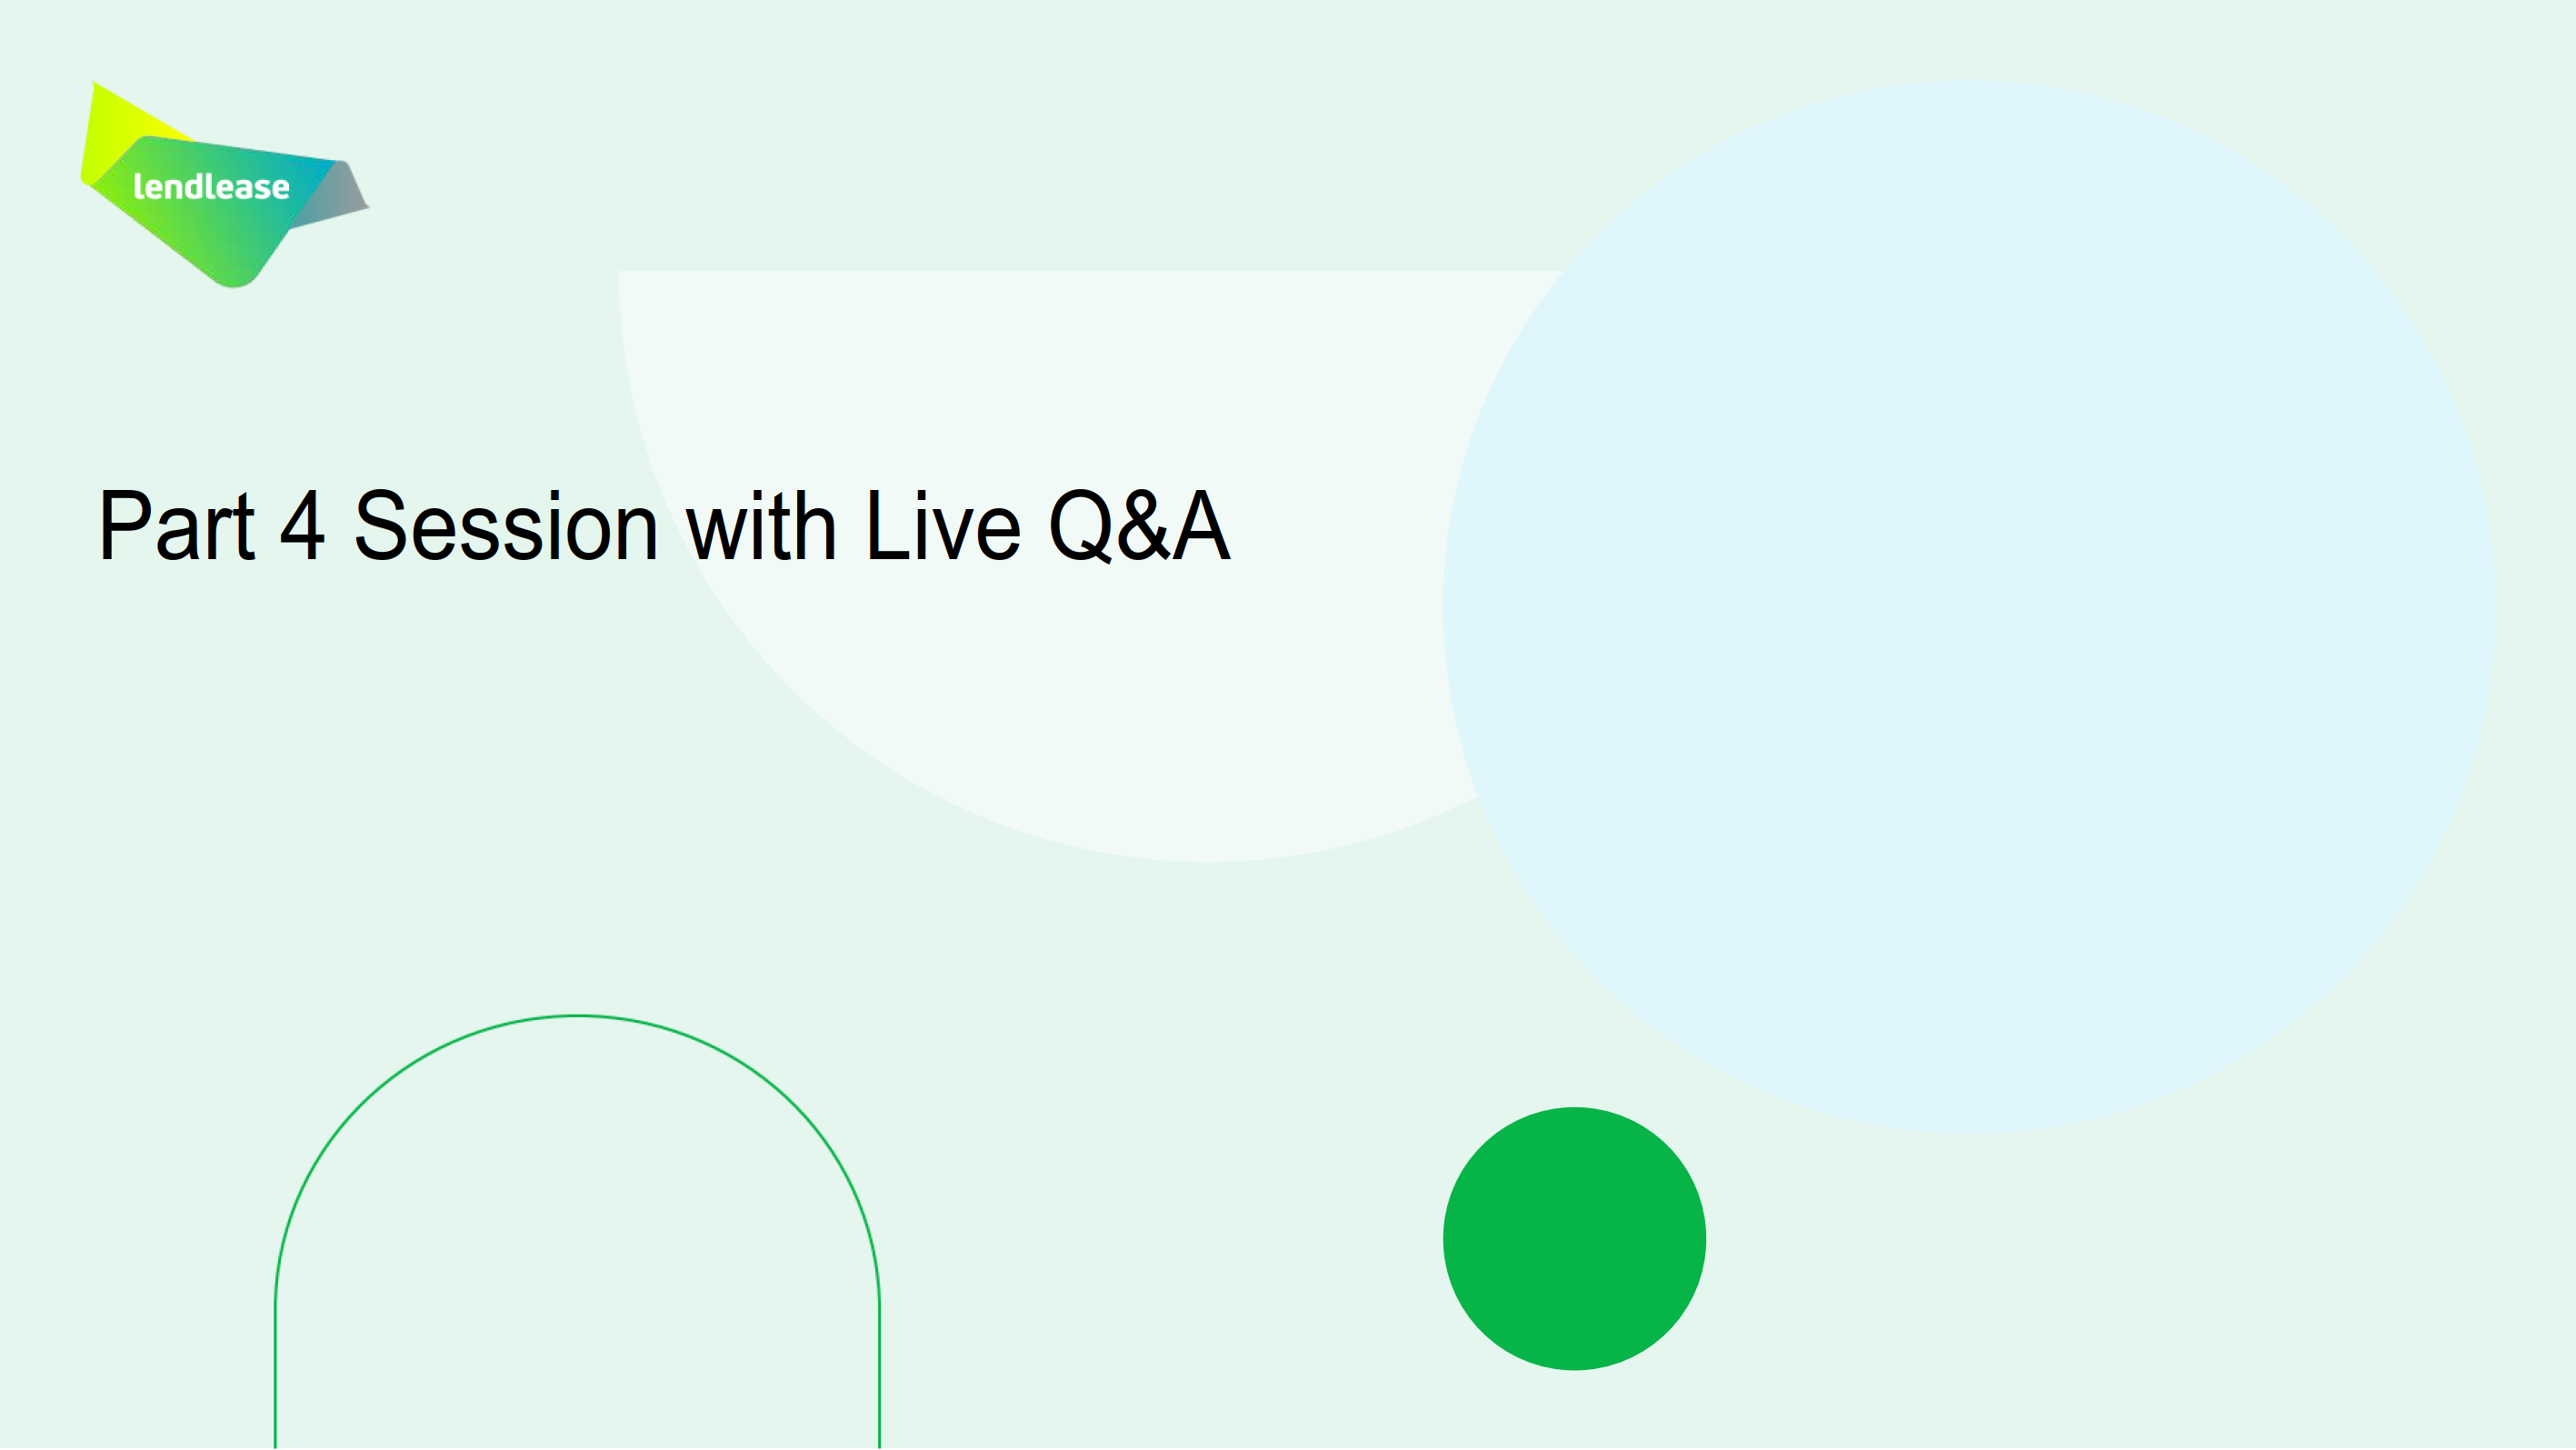 Part 4 Session with Live Q&A